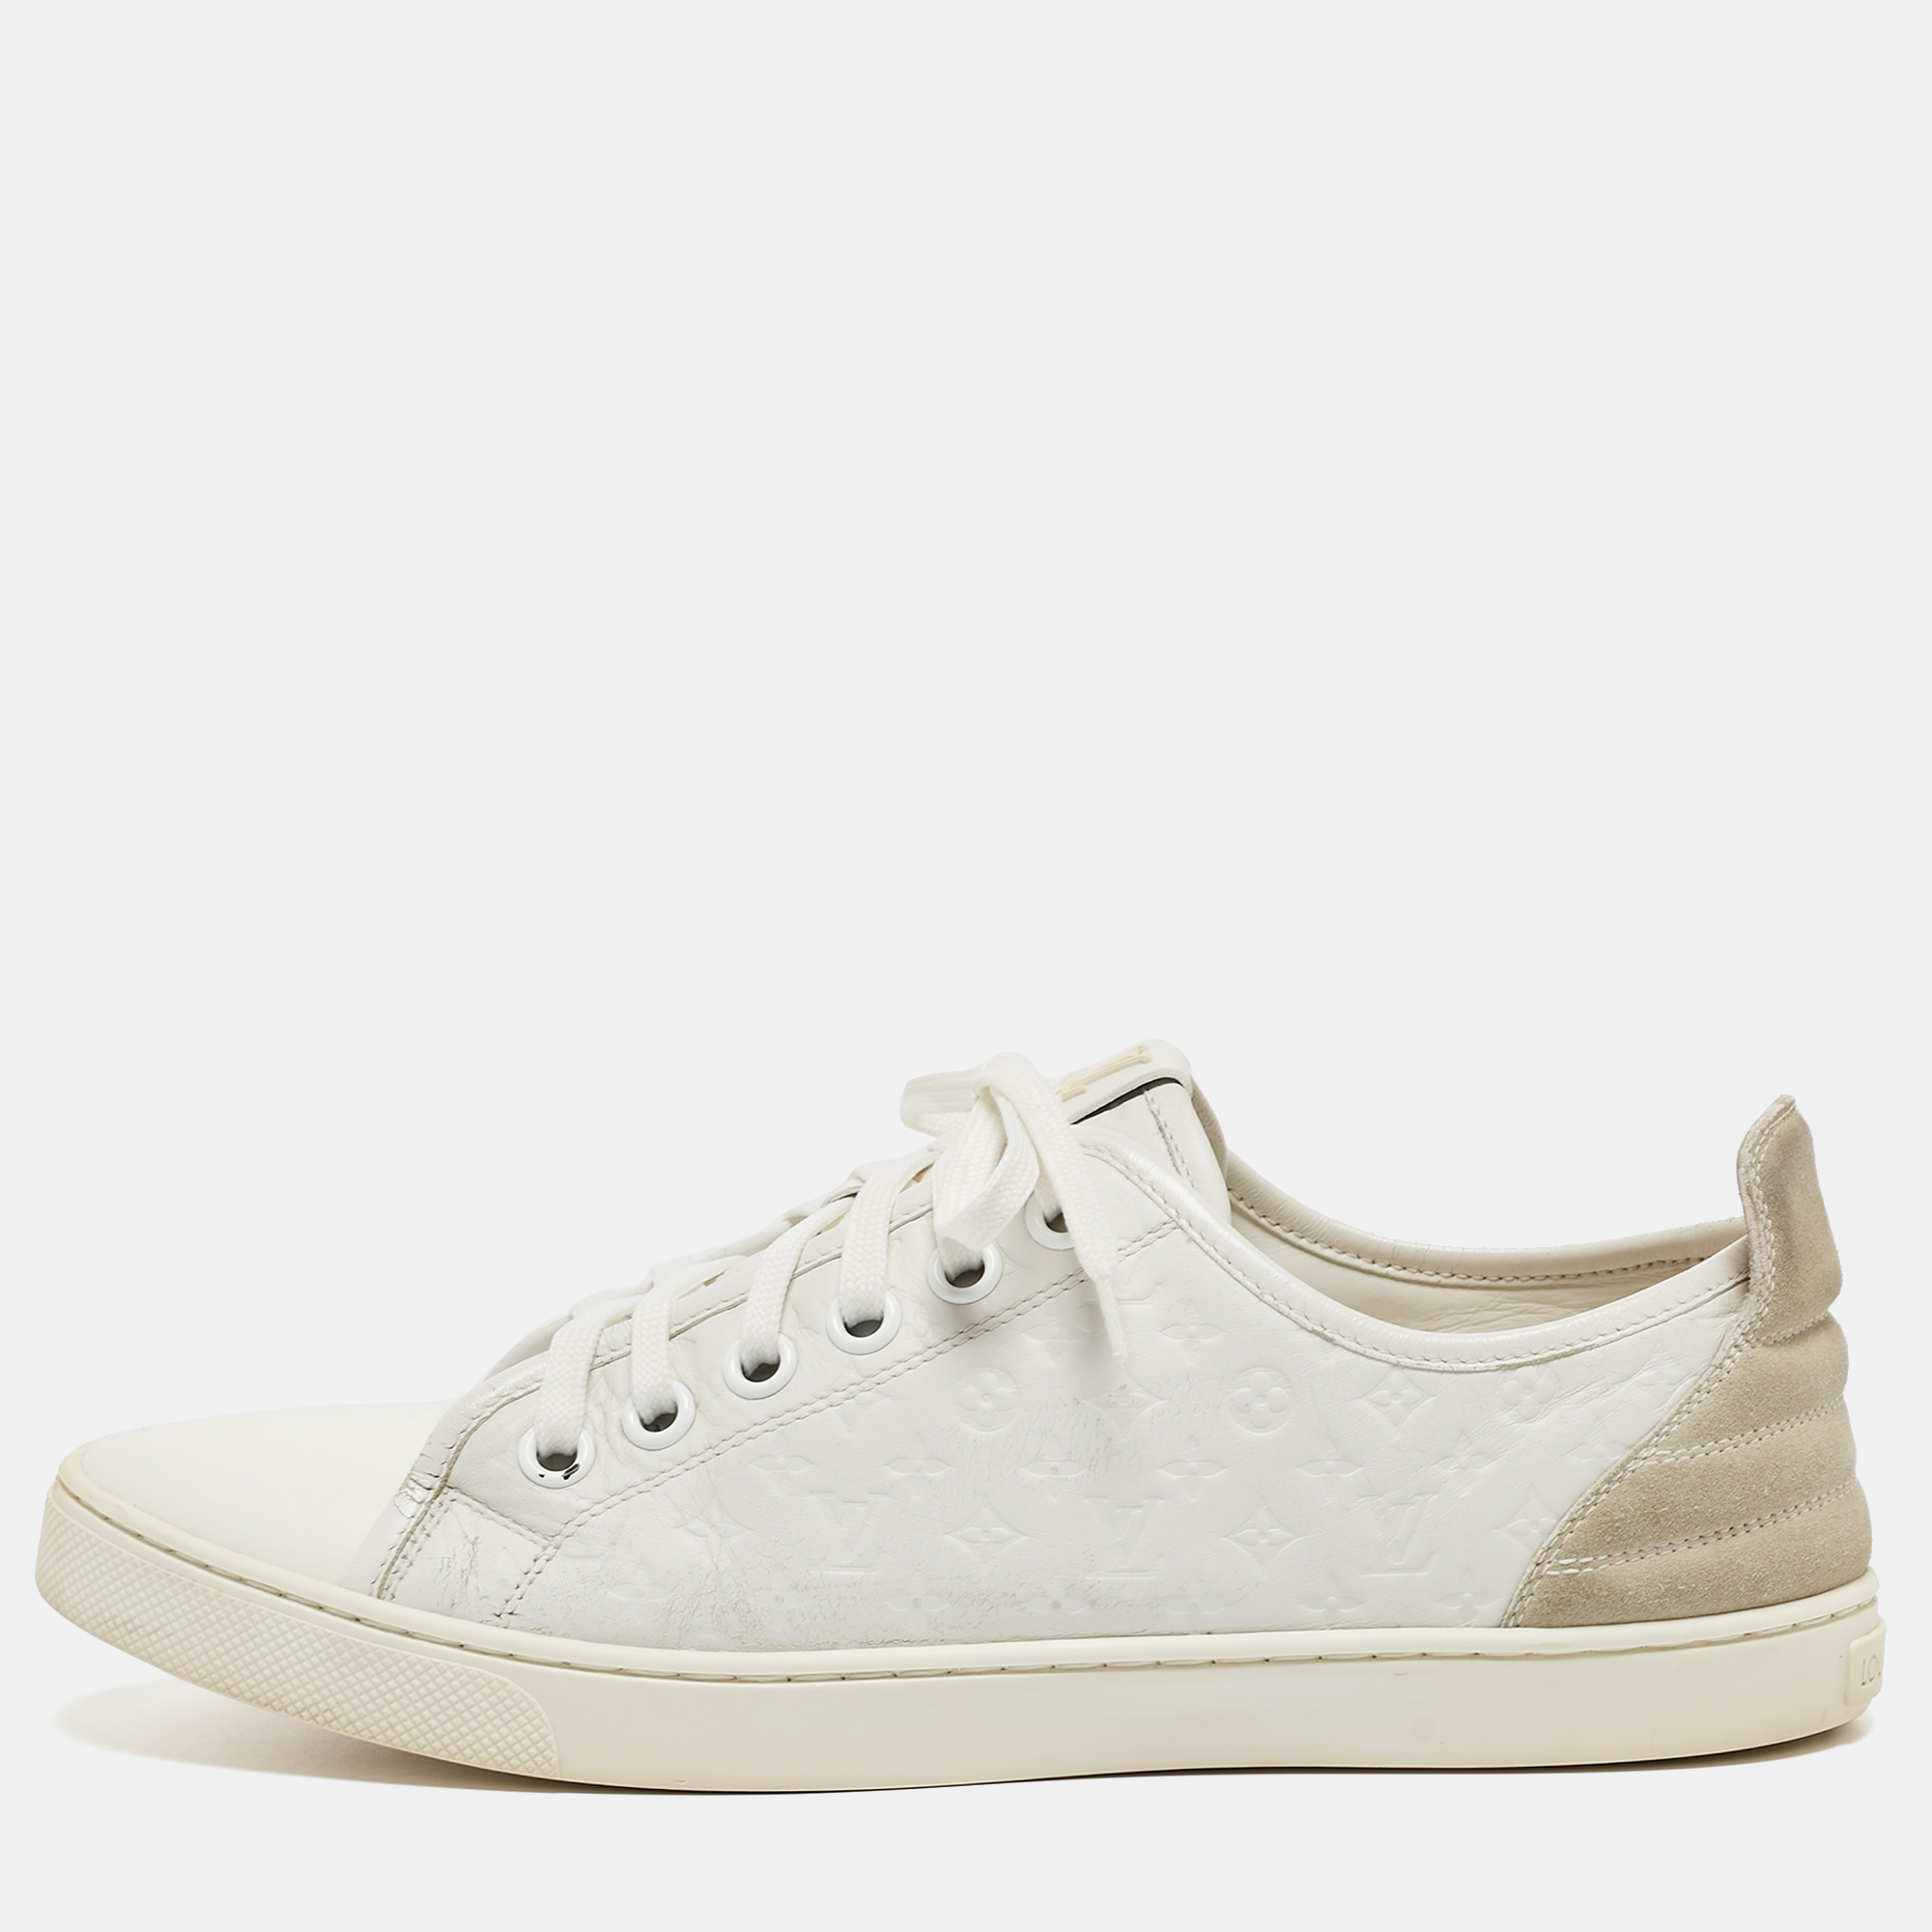 Louis Vuitton White Monogram Embossed Leather Punchy Low Top Sneakers Size 40